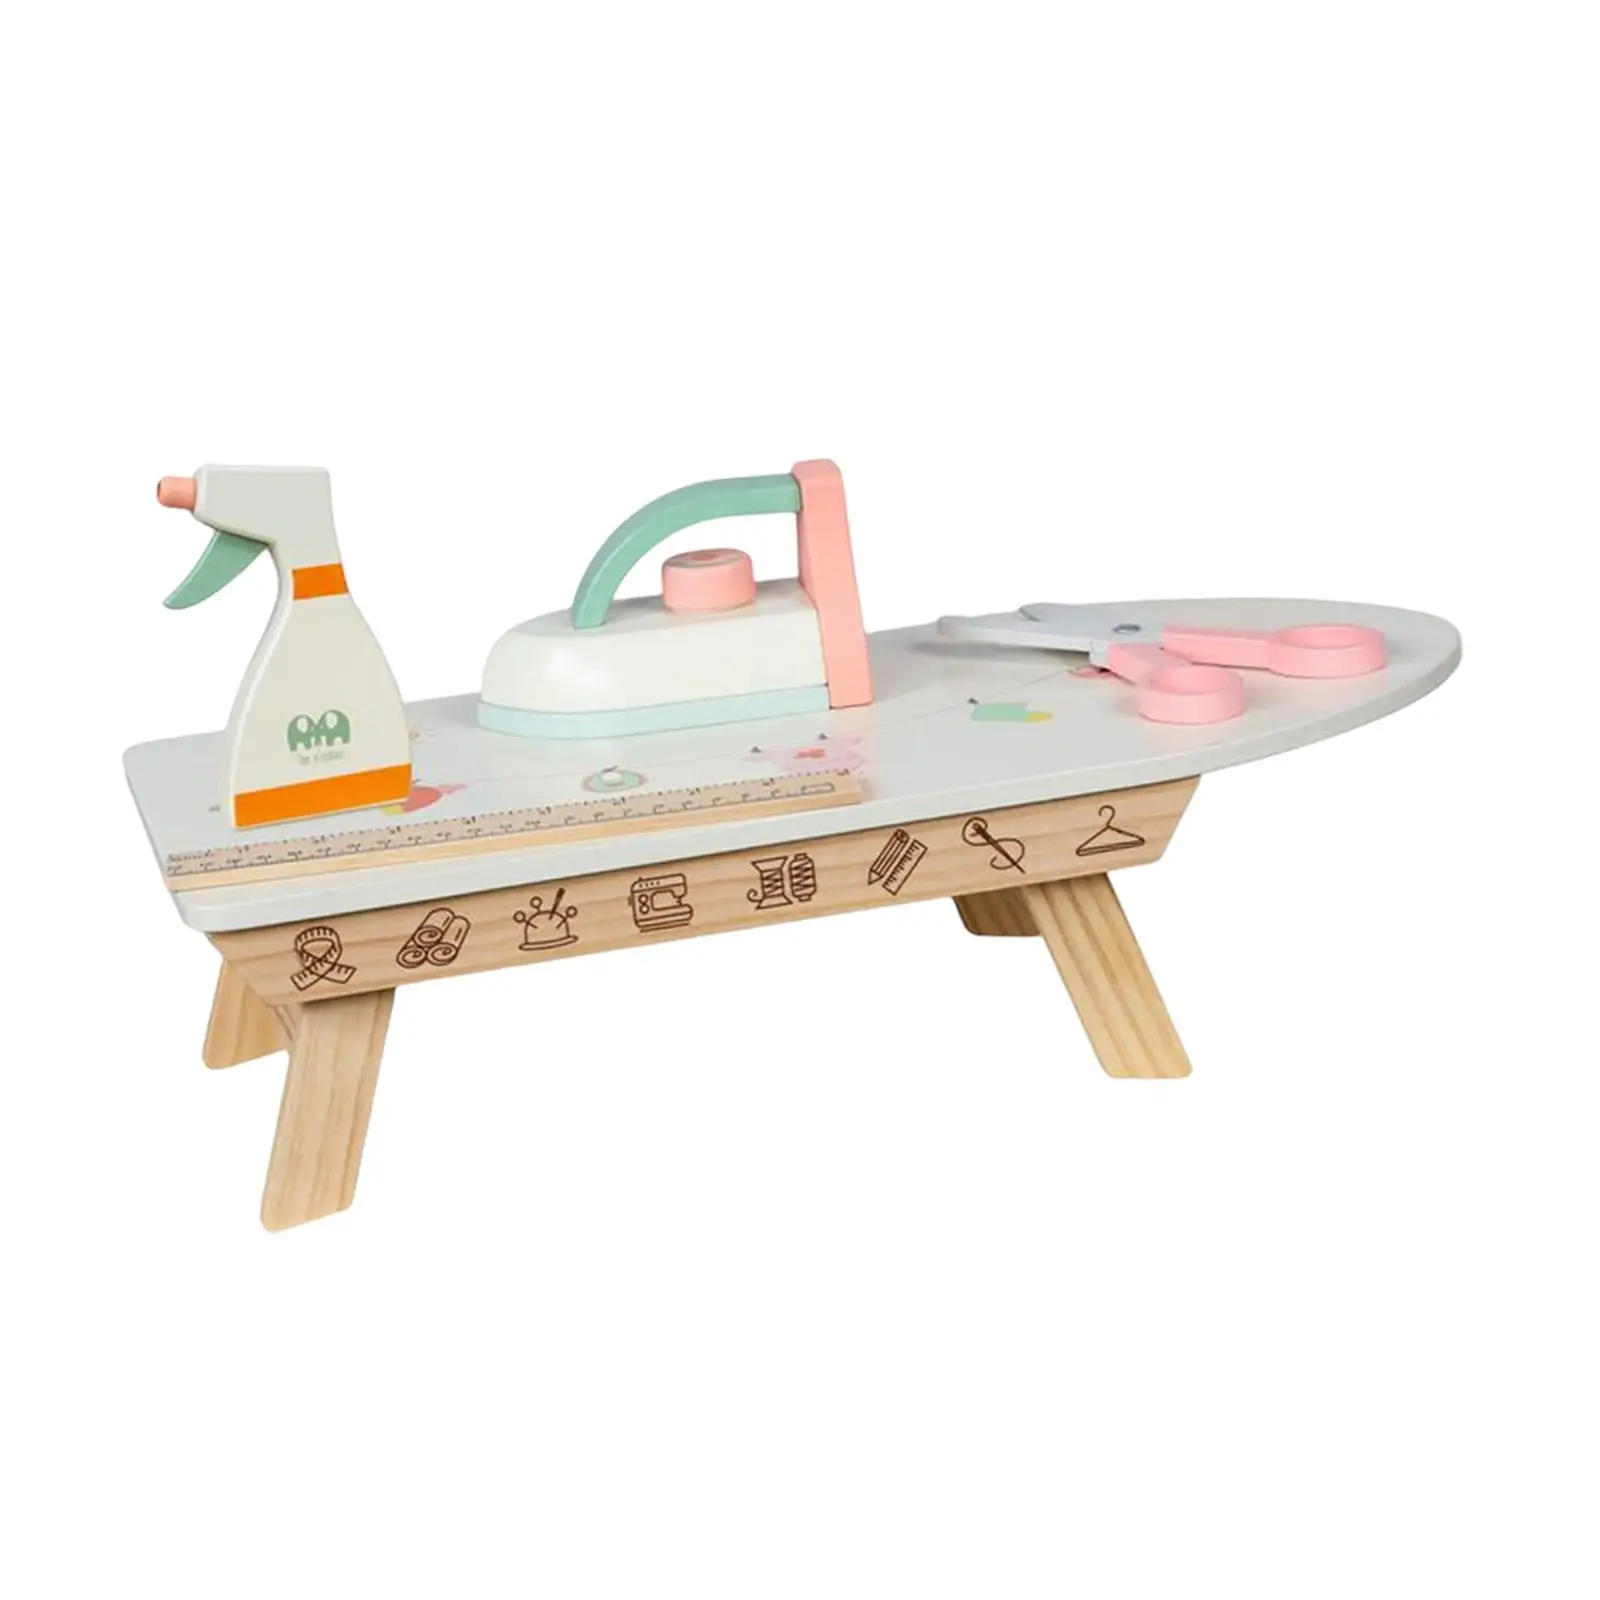 Pretend Ironing Board and Iron Wood Handicraft Toy with Clothes Iron, Ironing Board, & Accessories Laundry Toys for Girls Boys